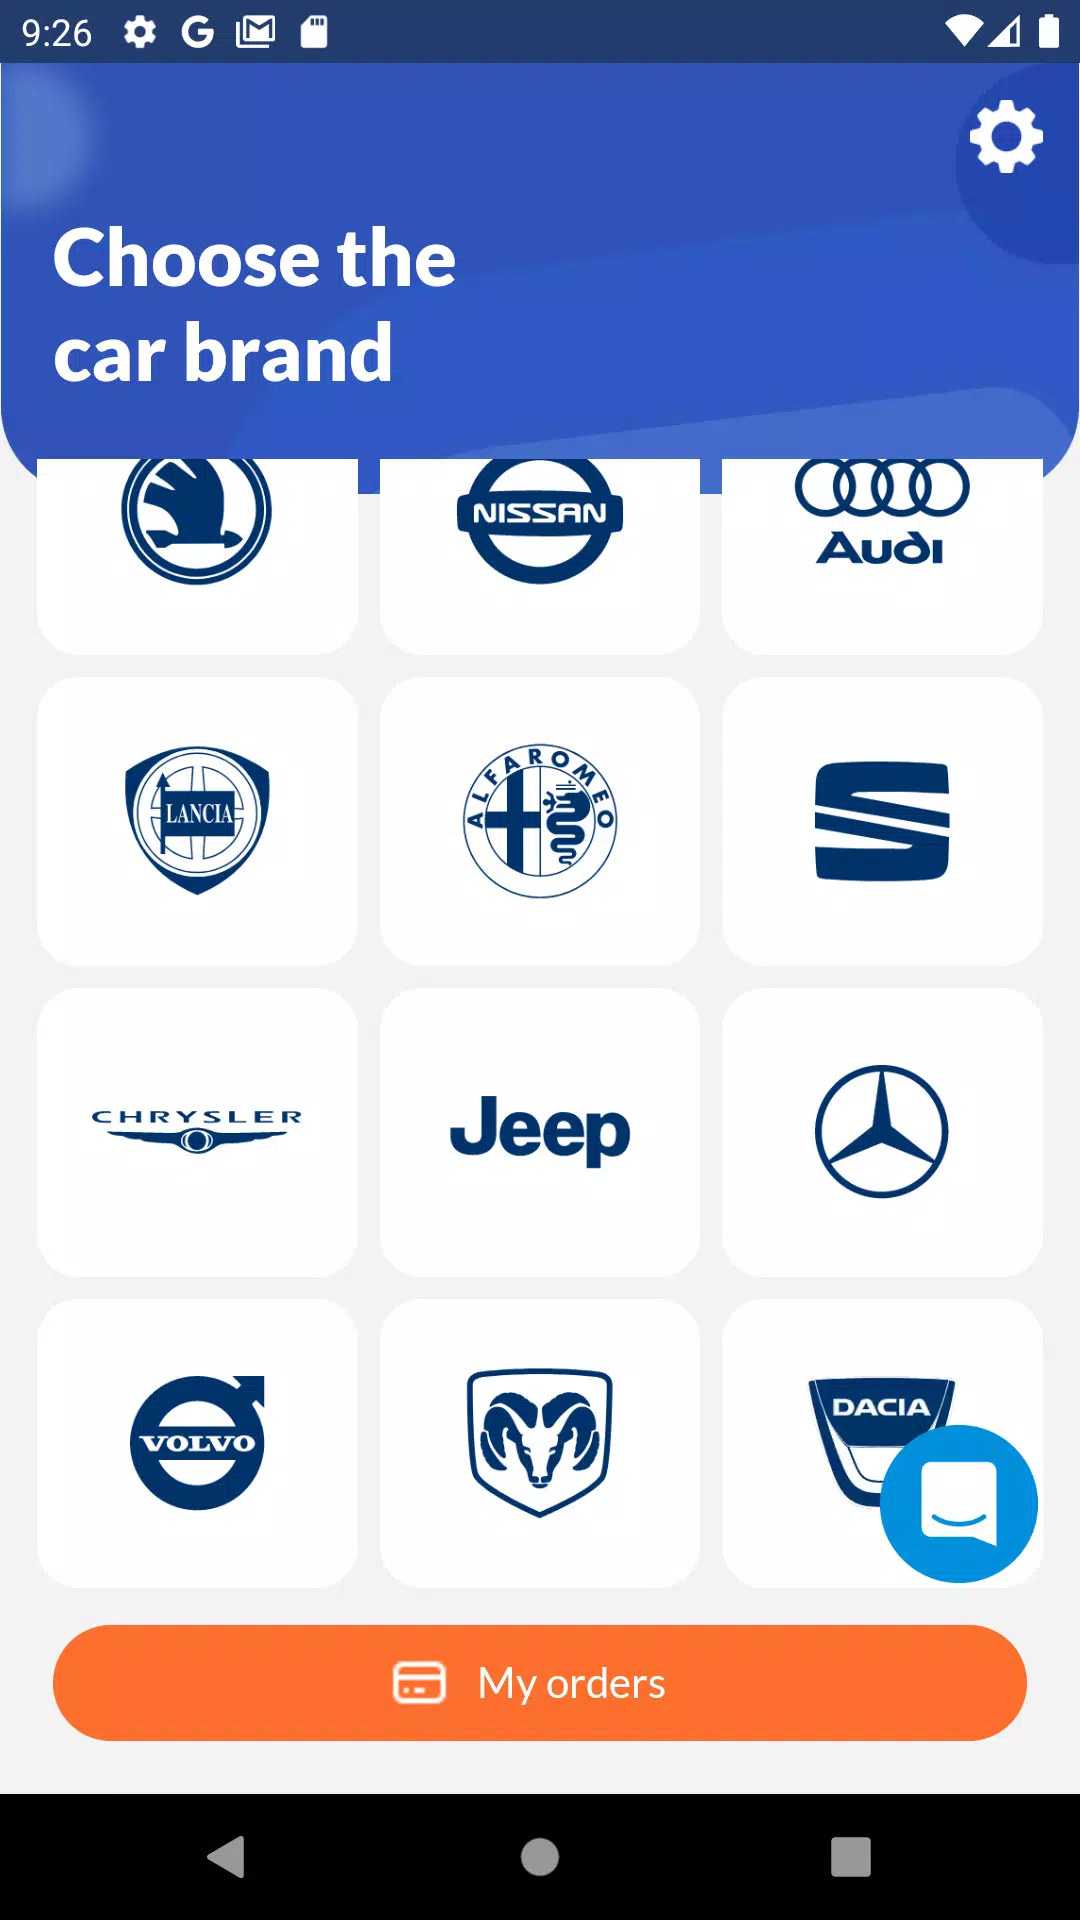 Radio Code Generator for Cars for Android - APK Download